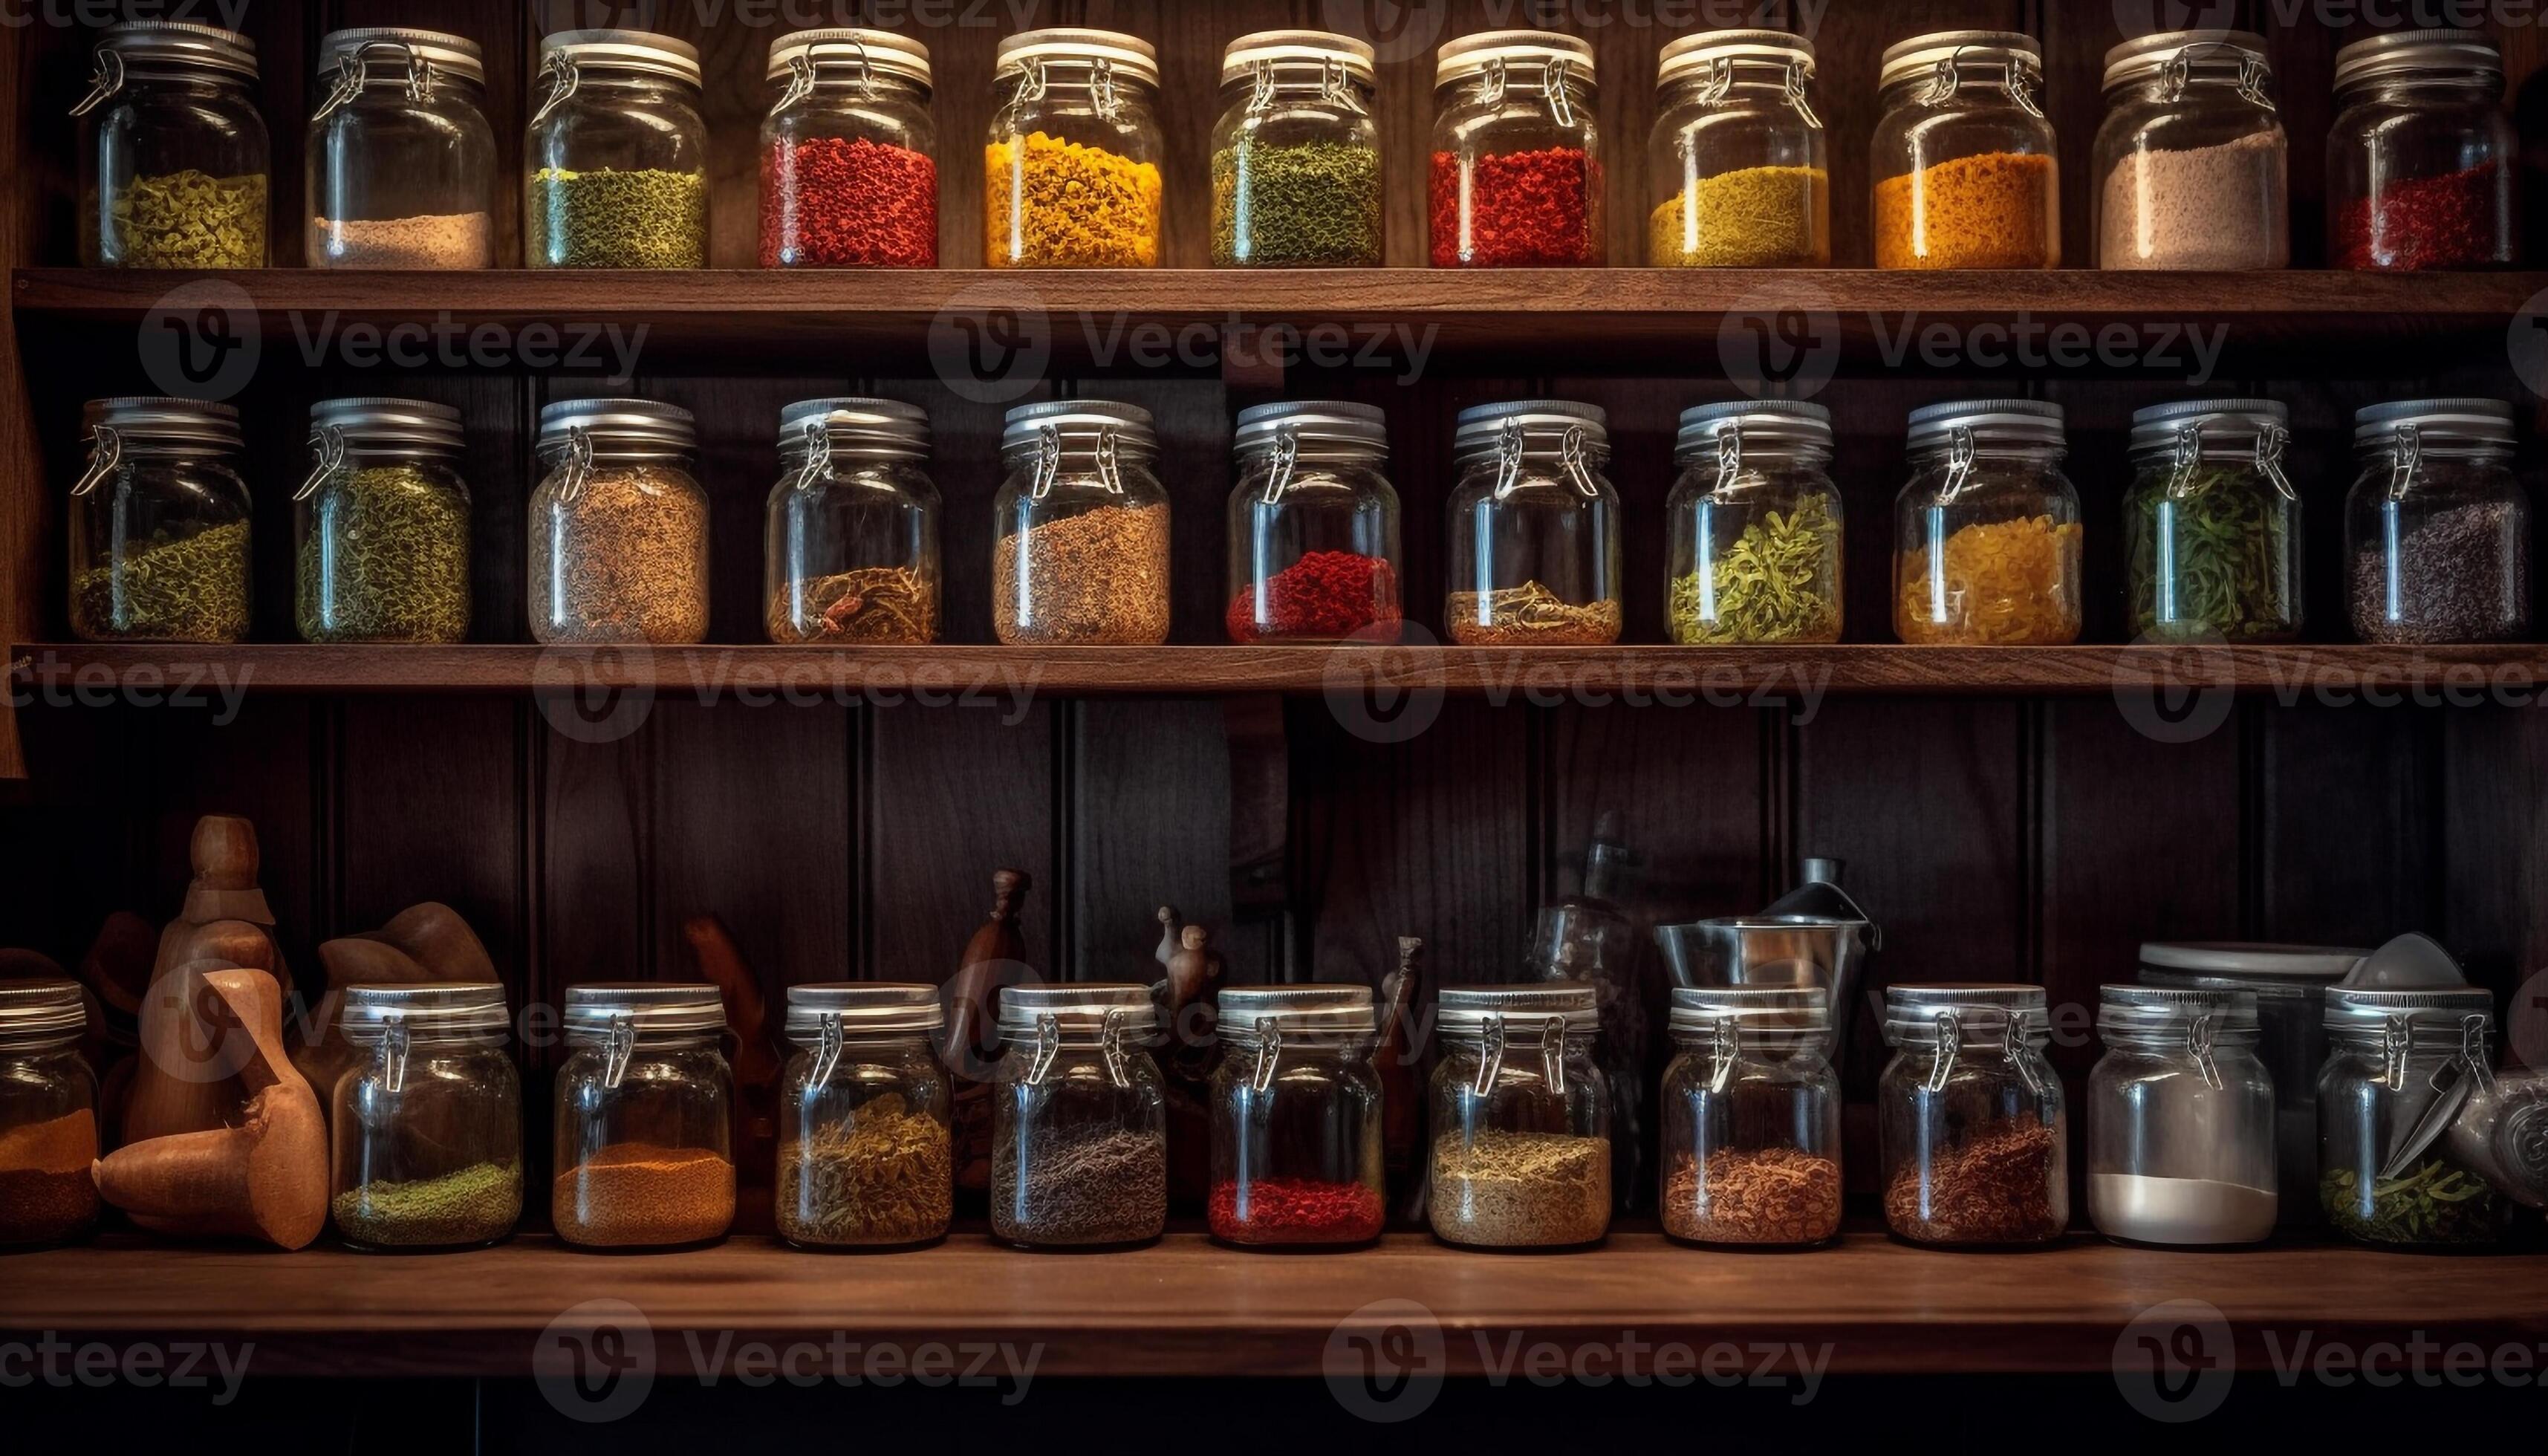 https://static.vecteezy.com/system/resources/previews/025/493/552/large_2x/a-large-collection-of-multi-colored-spice-jars-on-wooden-shelf-generated-by-ai-photo.jpg